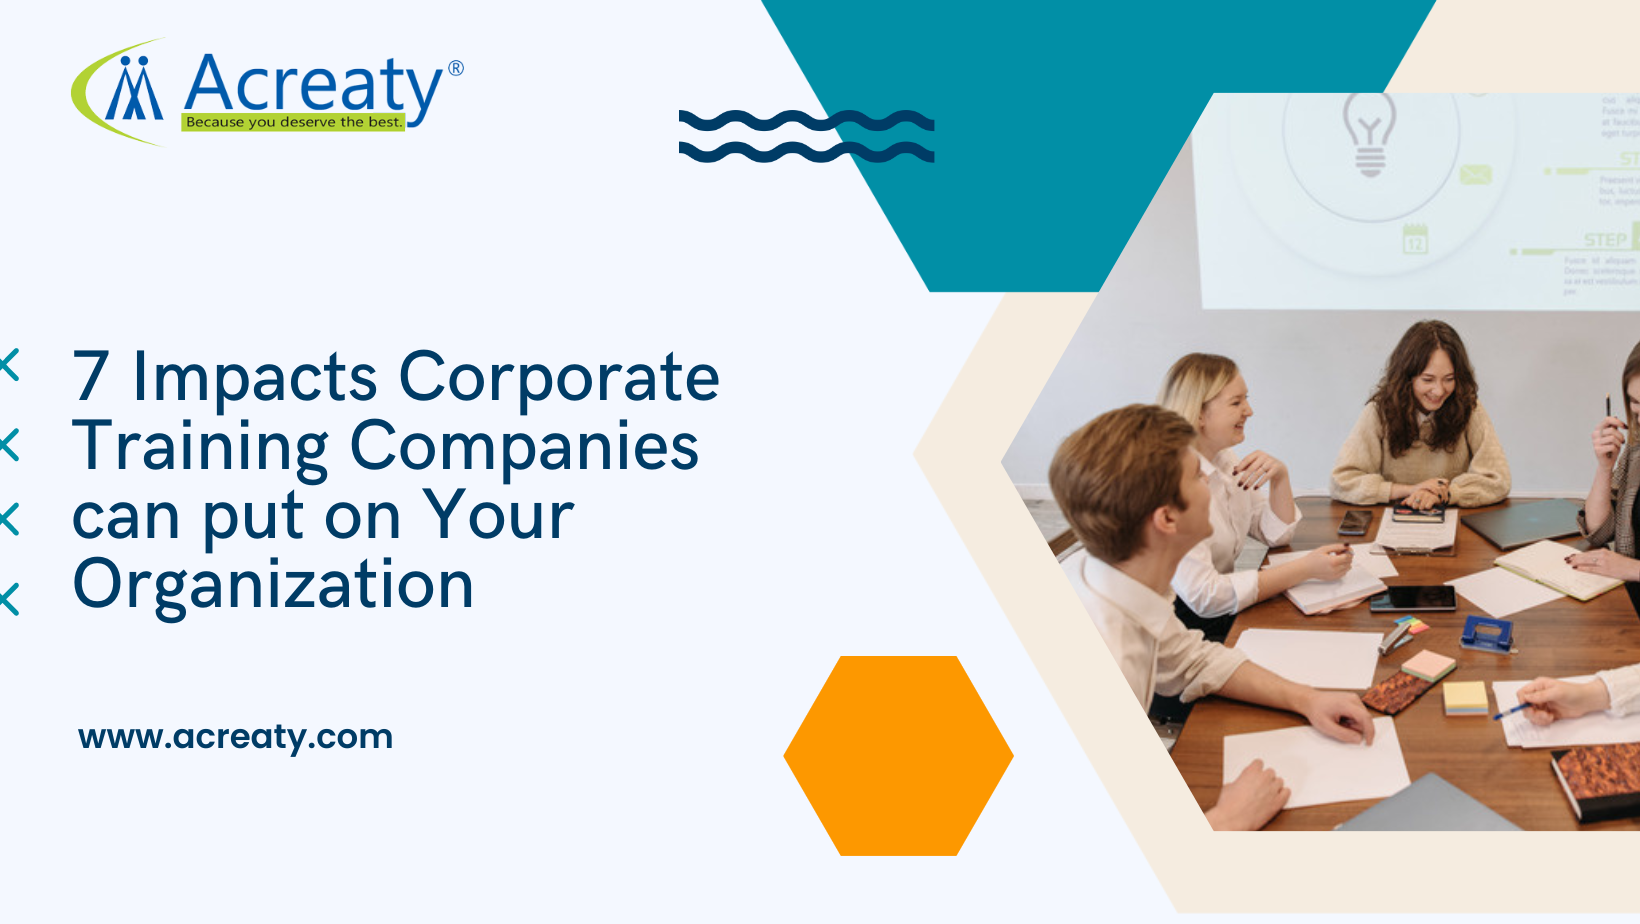 7 Impacts Corporate Training Companies can put on Your Organization